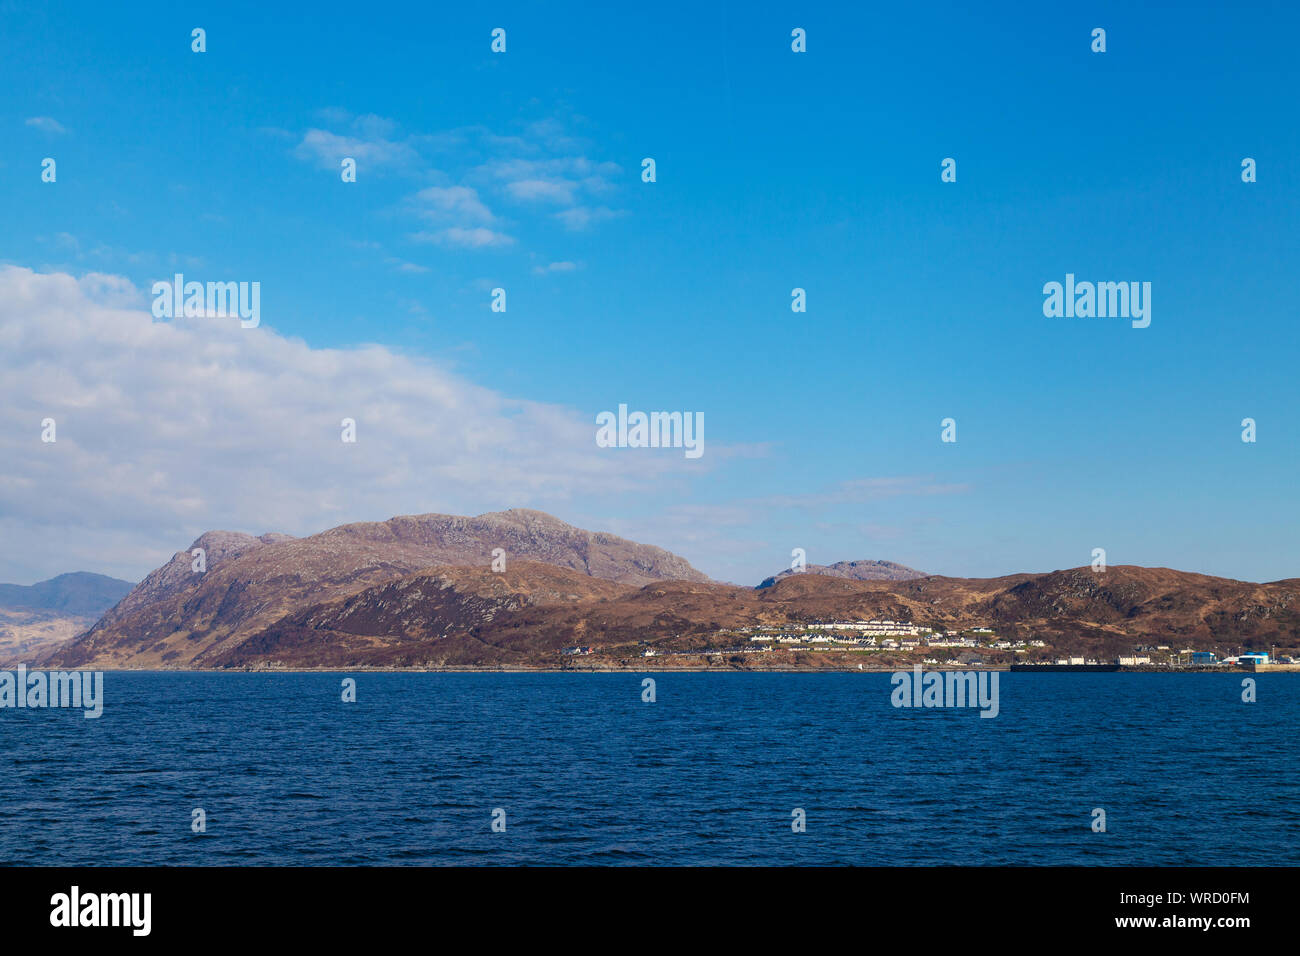 The harbour town of Mallaig in the Highlands of Scotland from a ferry heading to Rum. Stock Photo